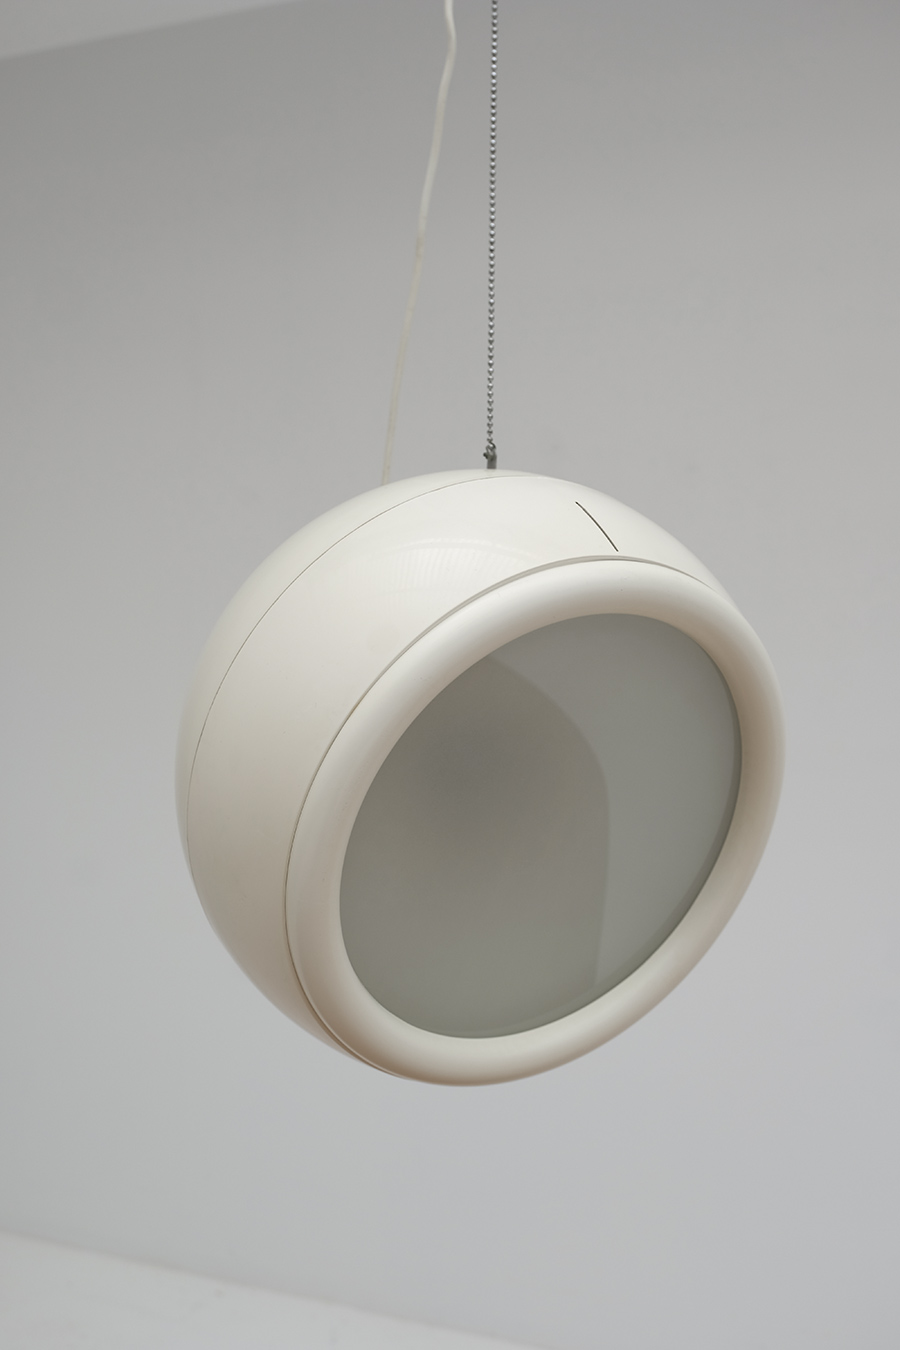 Pallade Lamp by Studio Tetrarch for Artemideimage 3